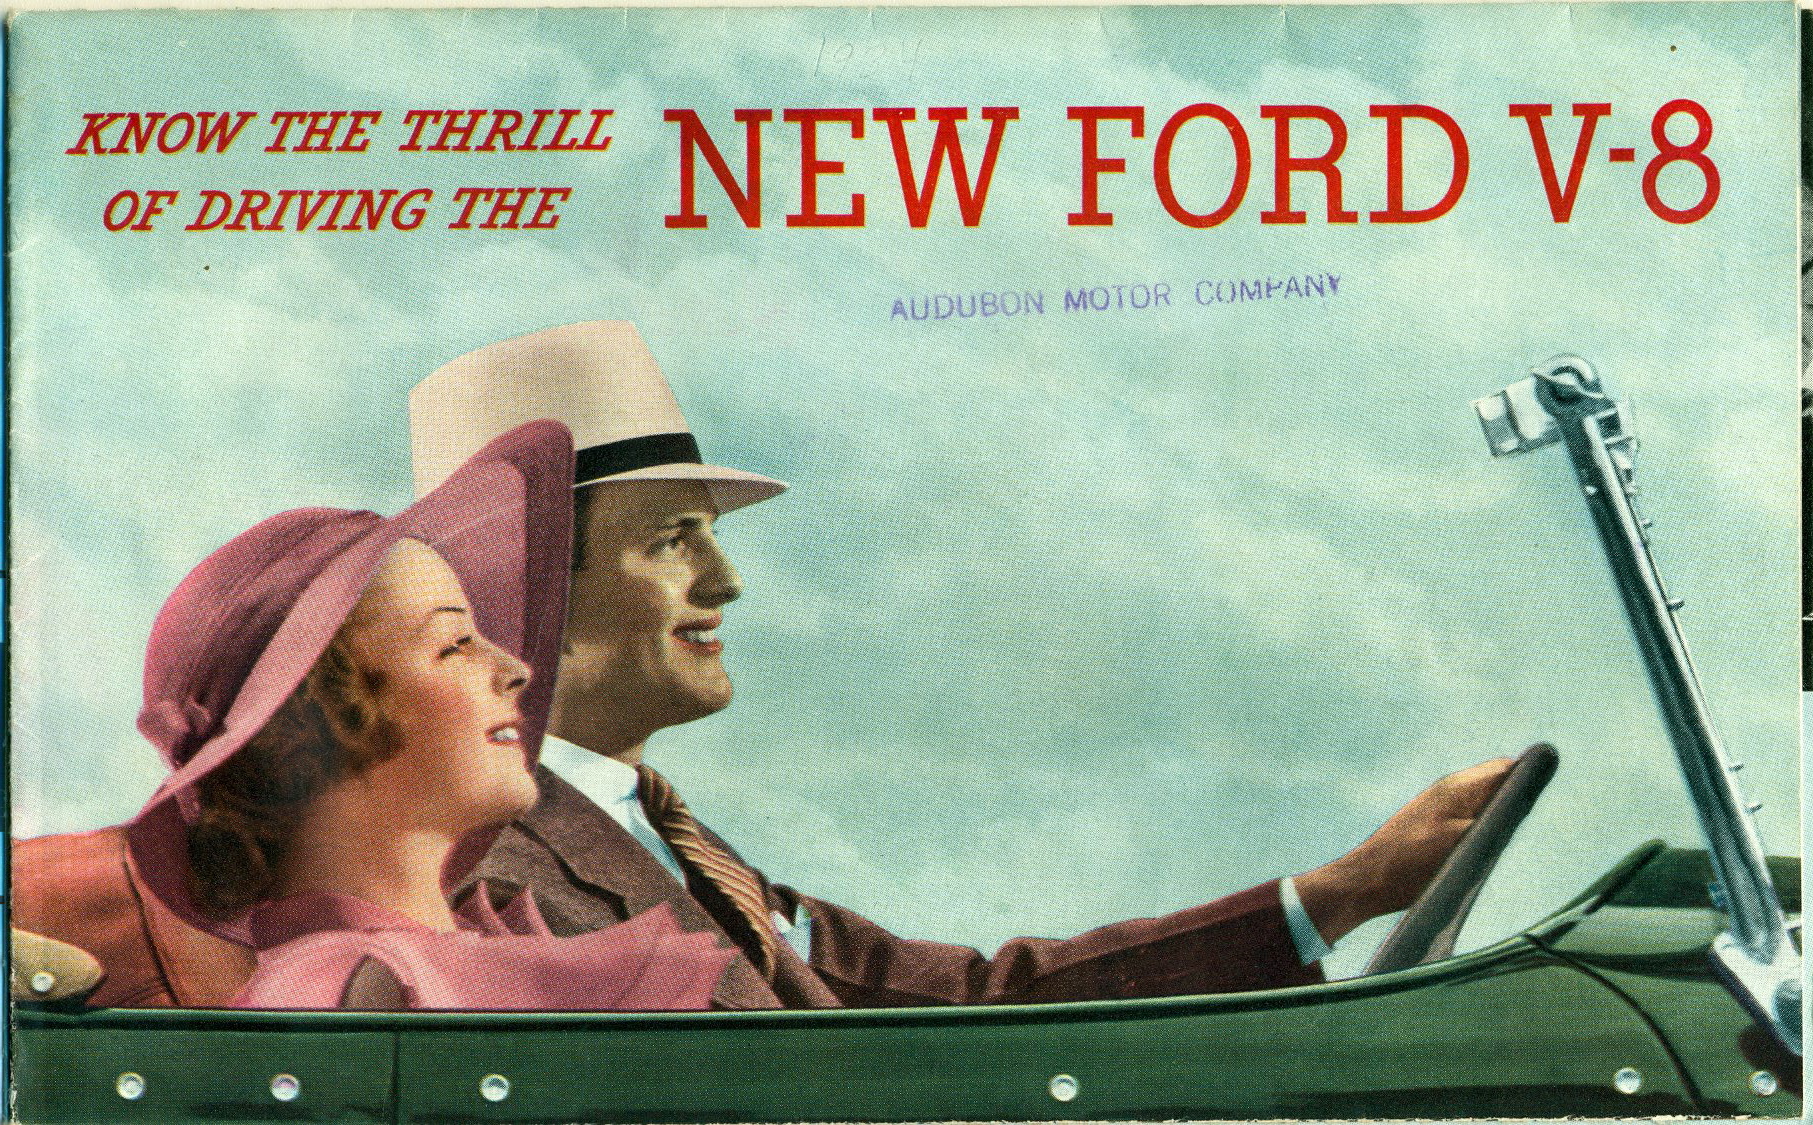 Front of th 1934 Ford Brochure